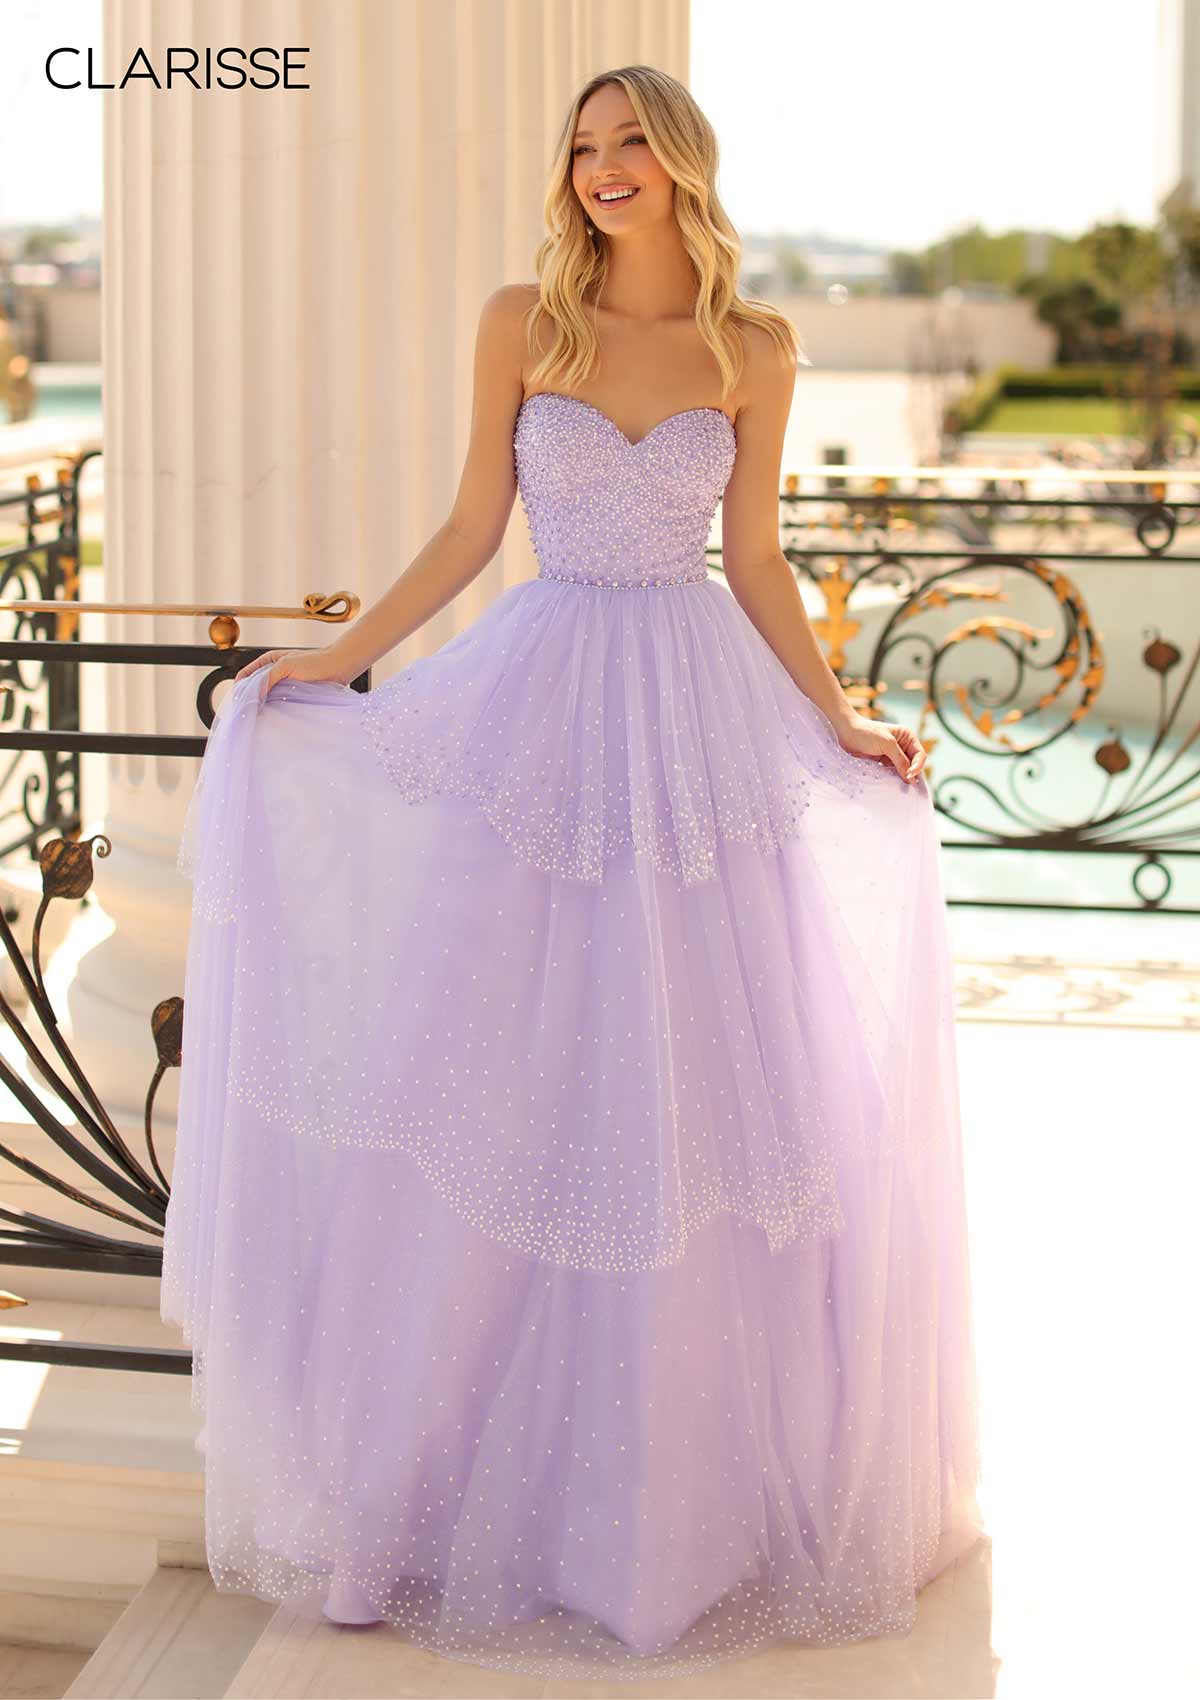 Clarisse - 810595 - All Dressed Up, Prom/Party Dress - 00 - Dresses Two Piece Cut Out Sweetheart Halter Low Back High Neck Print Beaded Chiffon Jersey Fitted Sexy Satin Lace Jeweled Sparkle Shimmer Sleeveless Stunning Gorgeous Modest See Through Transparent Glitter Special Occasions Event Chattanooga Hixson Shops Boutiques Tennessee TN Georgia GA MSRP Lowest Prices Sale Discount